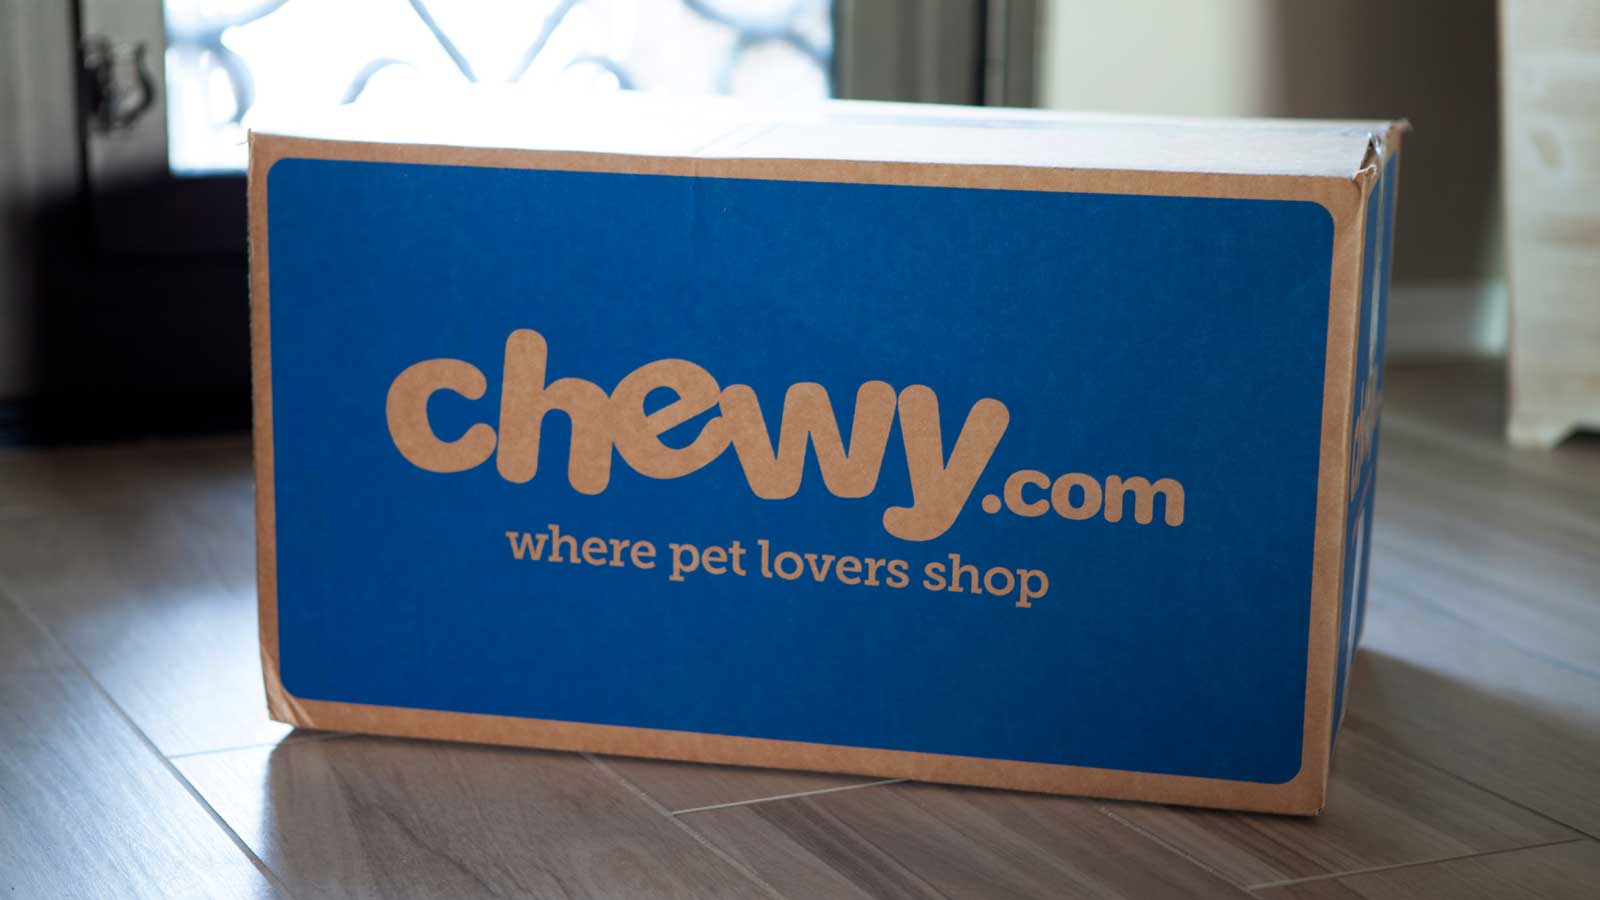 Why Is Chewy (CHWY) Stock Rising Today?